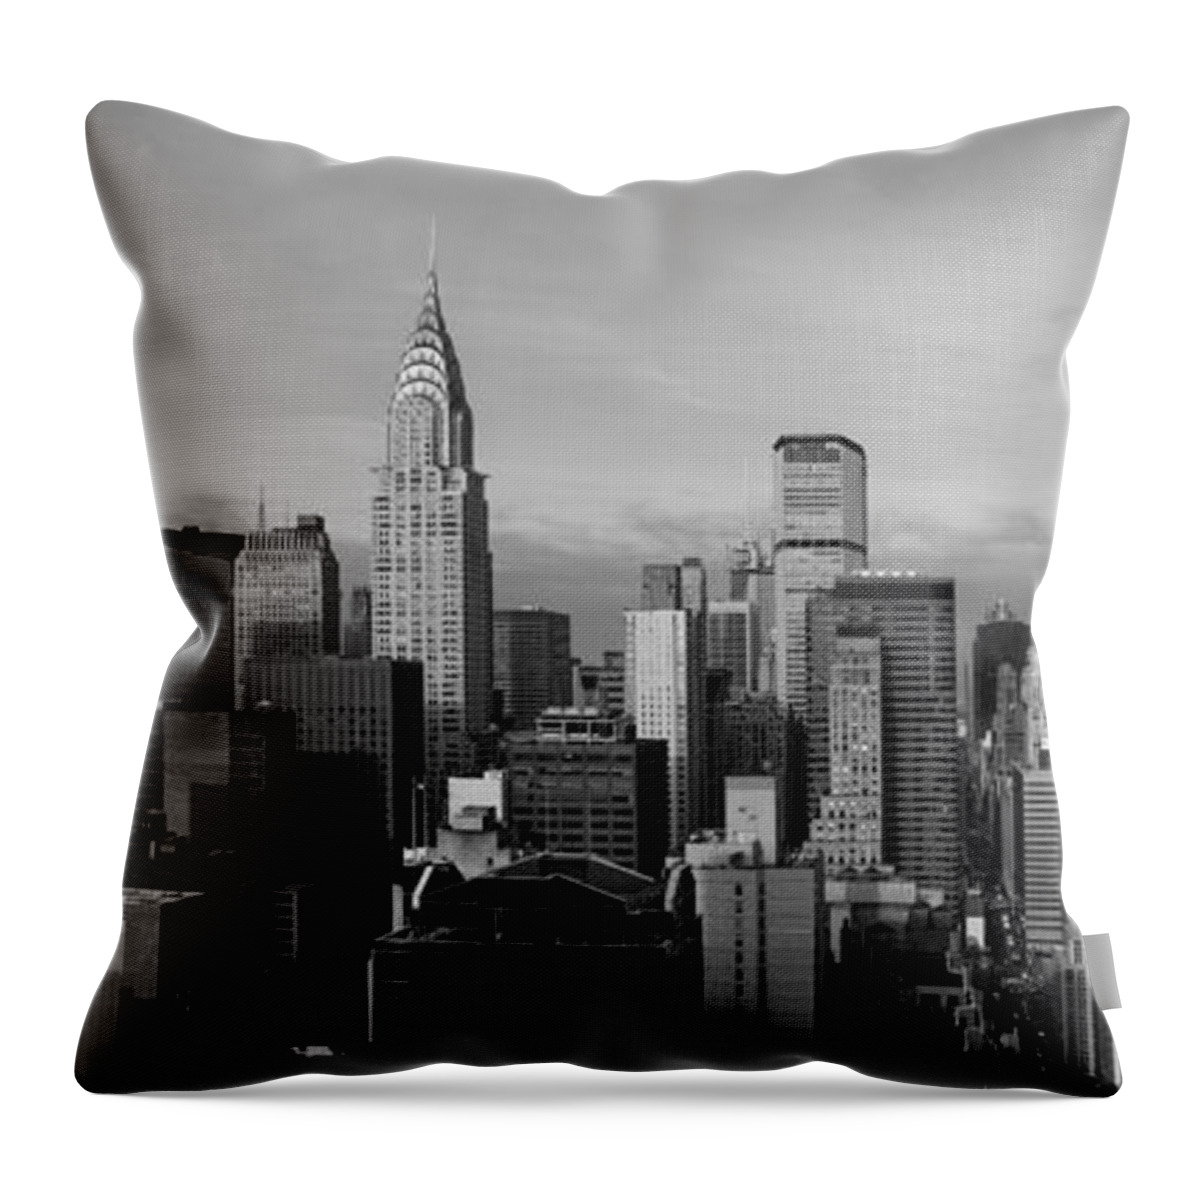 New York Throw Pillow featuring the photograph New York City Skyline by Diane Diederich